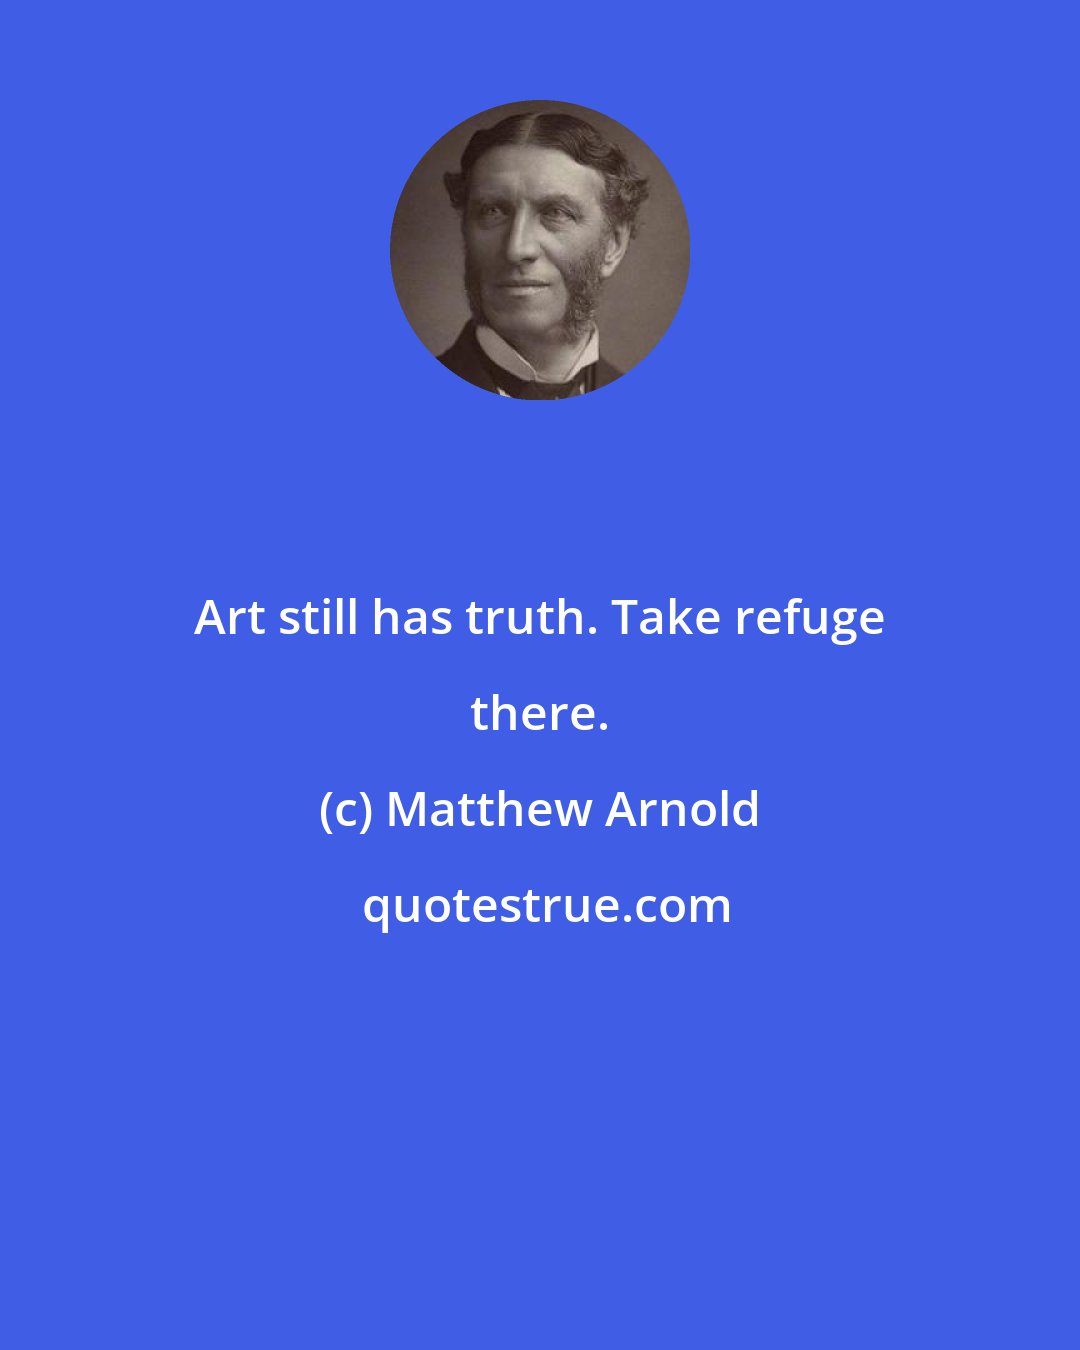 Matthew Arnold: Art still has truth. Take refuge there.